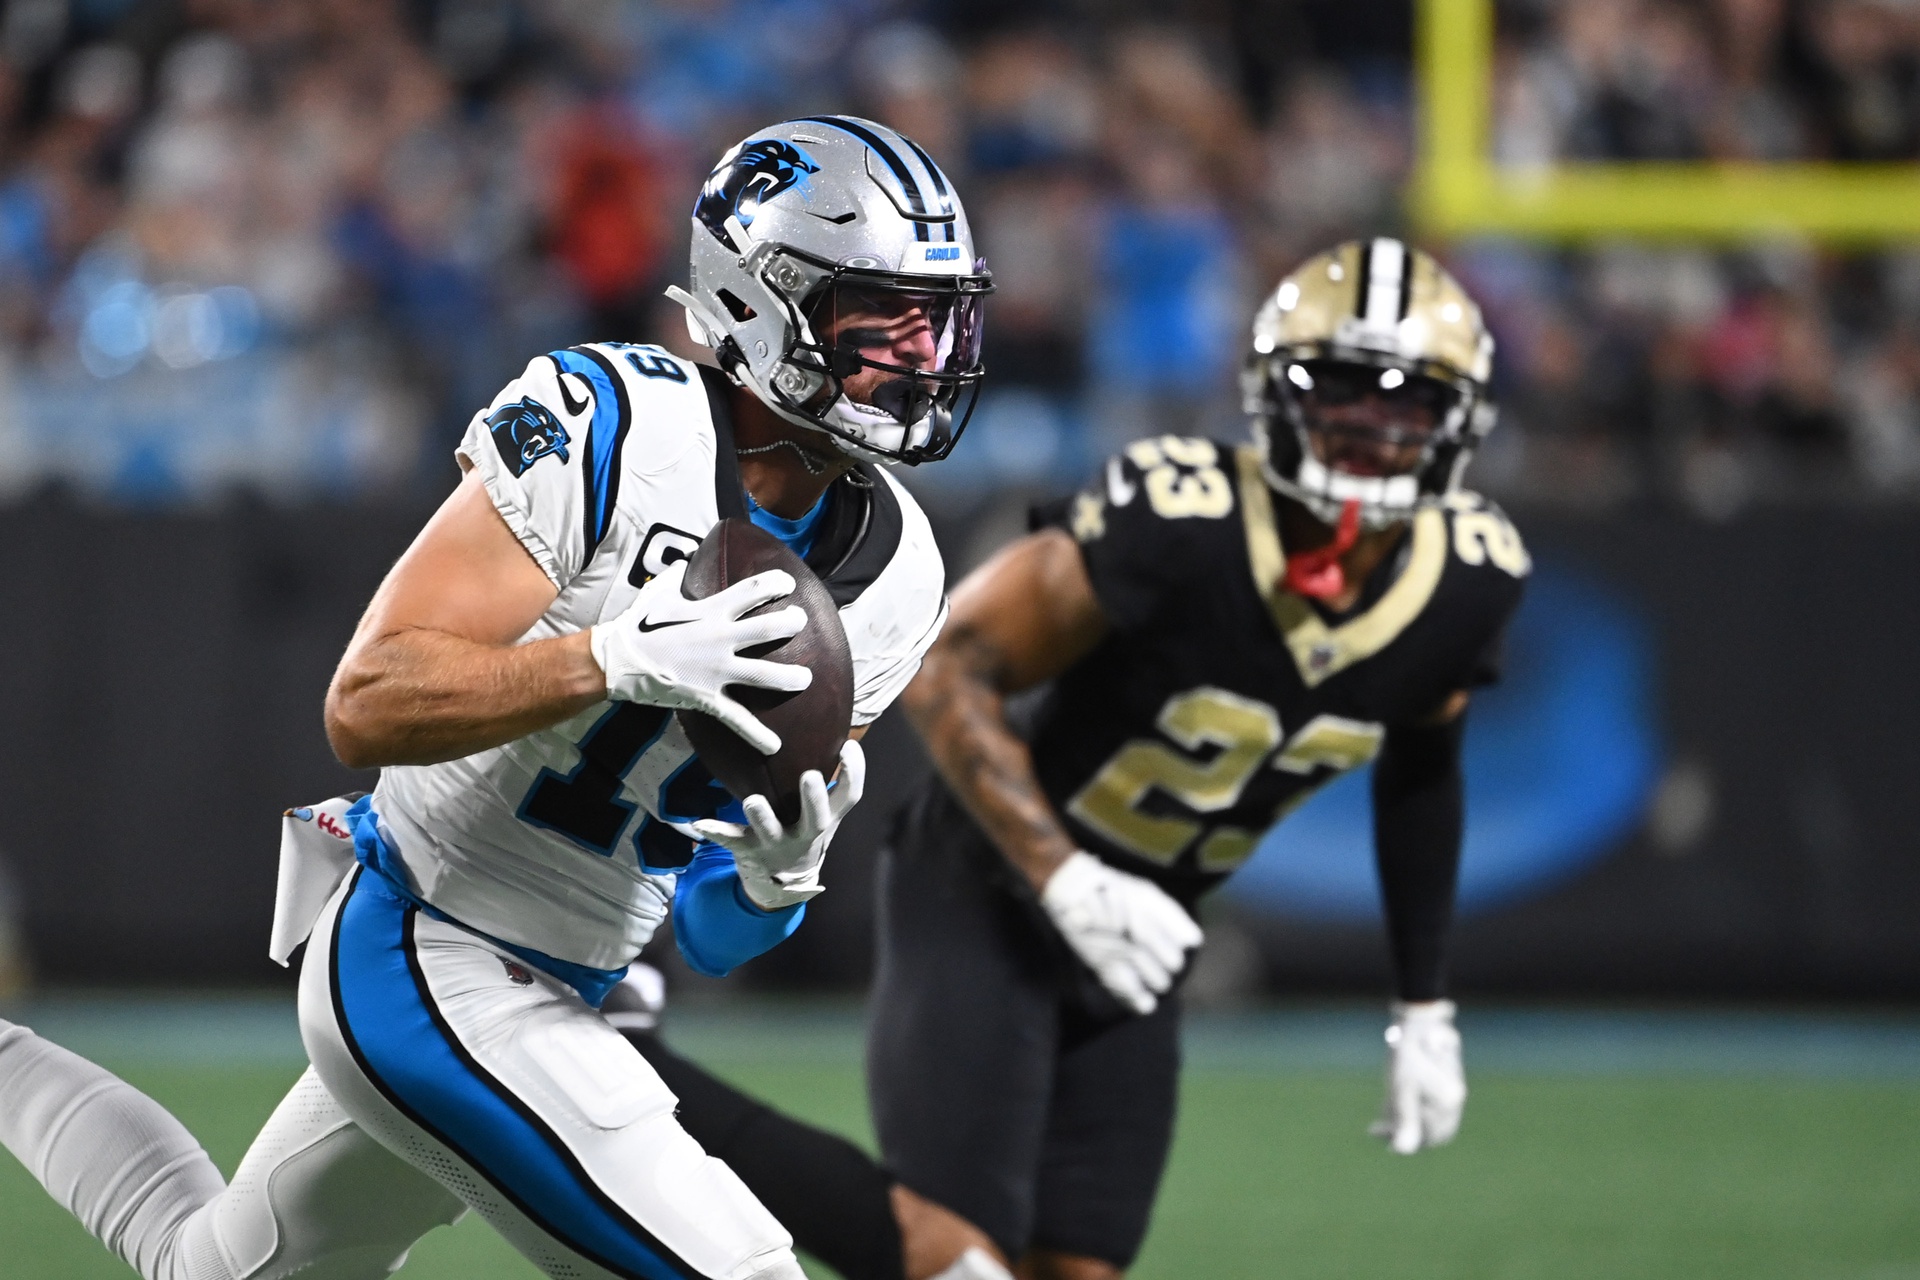 Carolina Panthers wide receiver Adam Thielen (19) with a catch as New Orleans Saints cornerback Marshon Lattimore (23) defends. Mandatory Credit: Bob Donnan-USA TODAY Sports